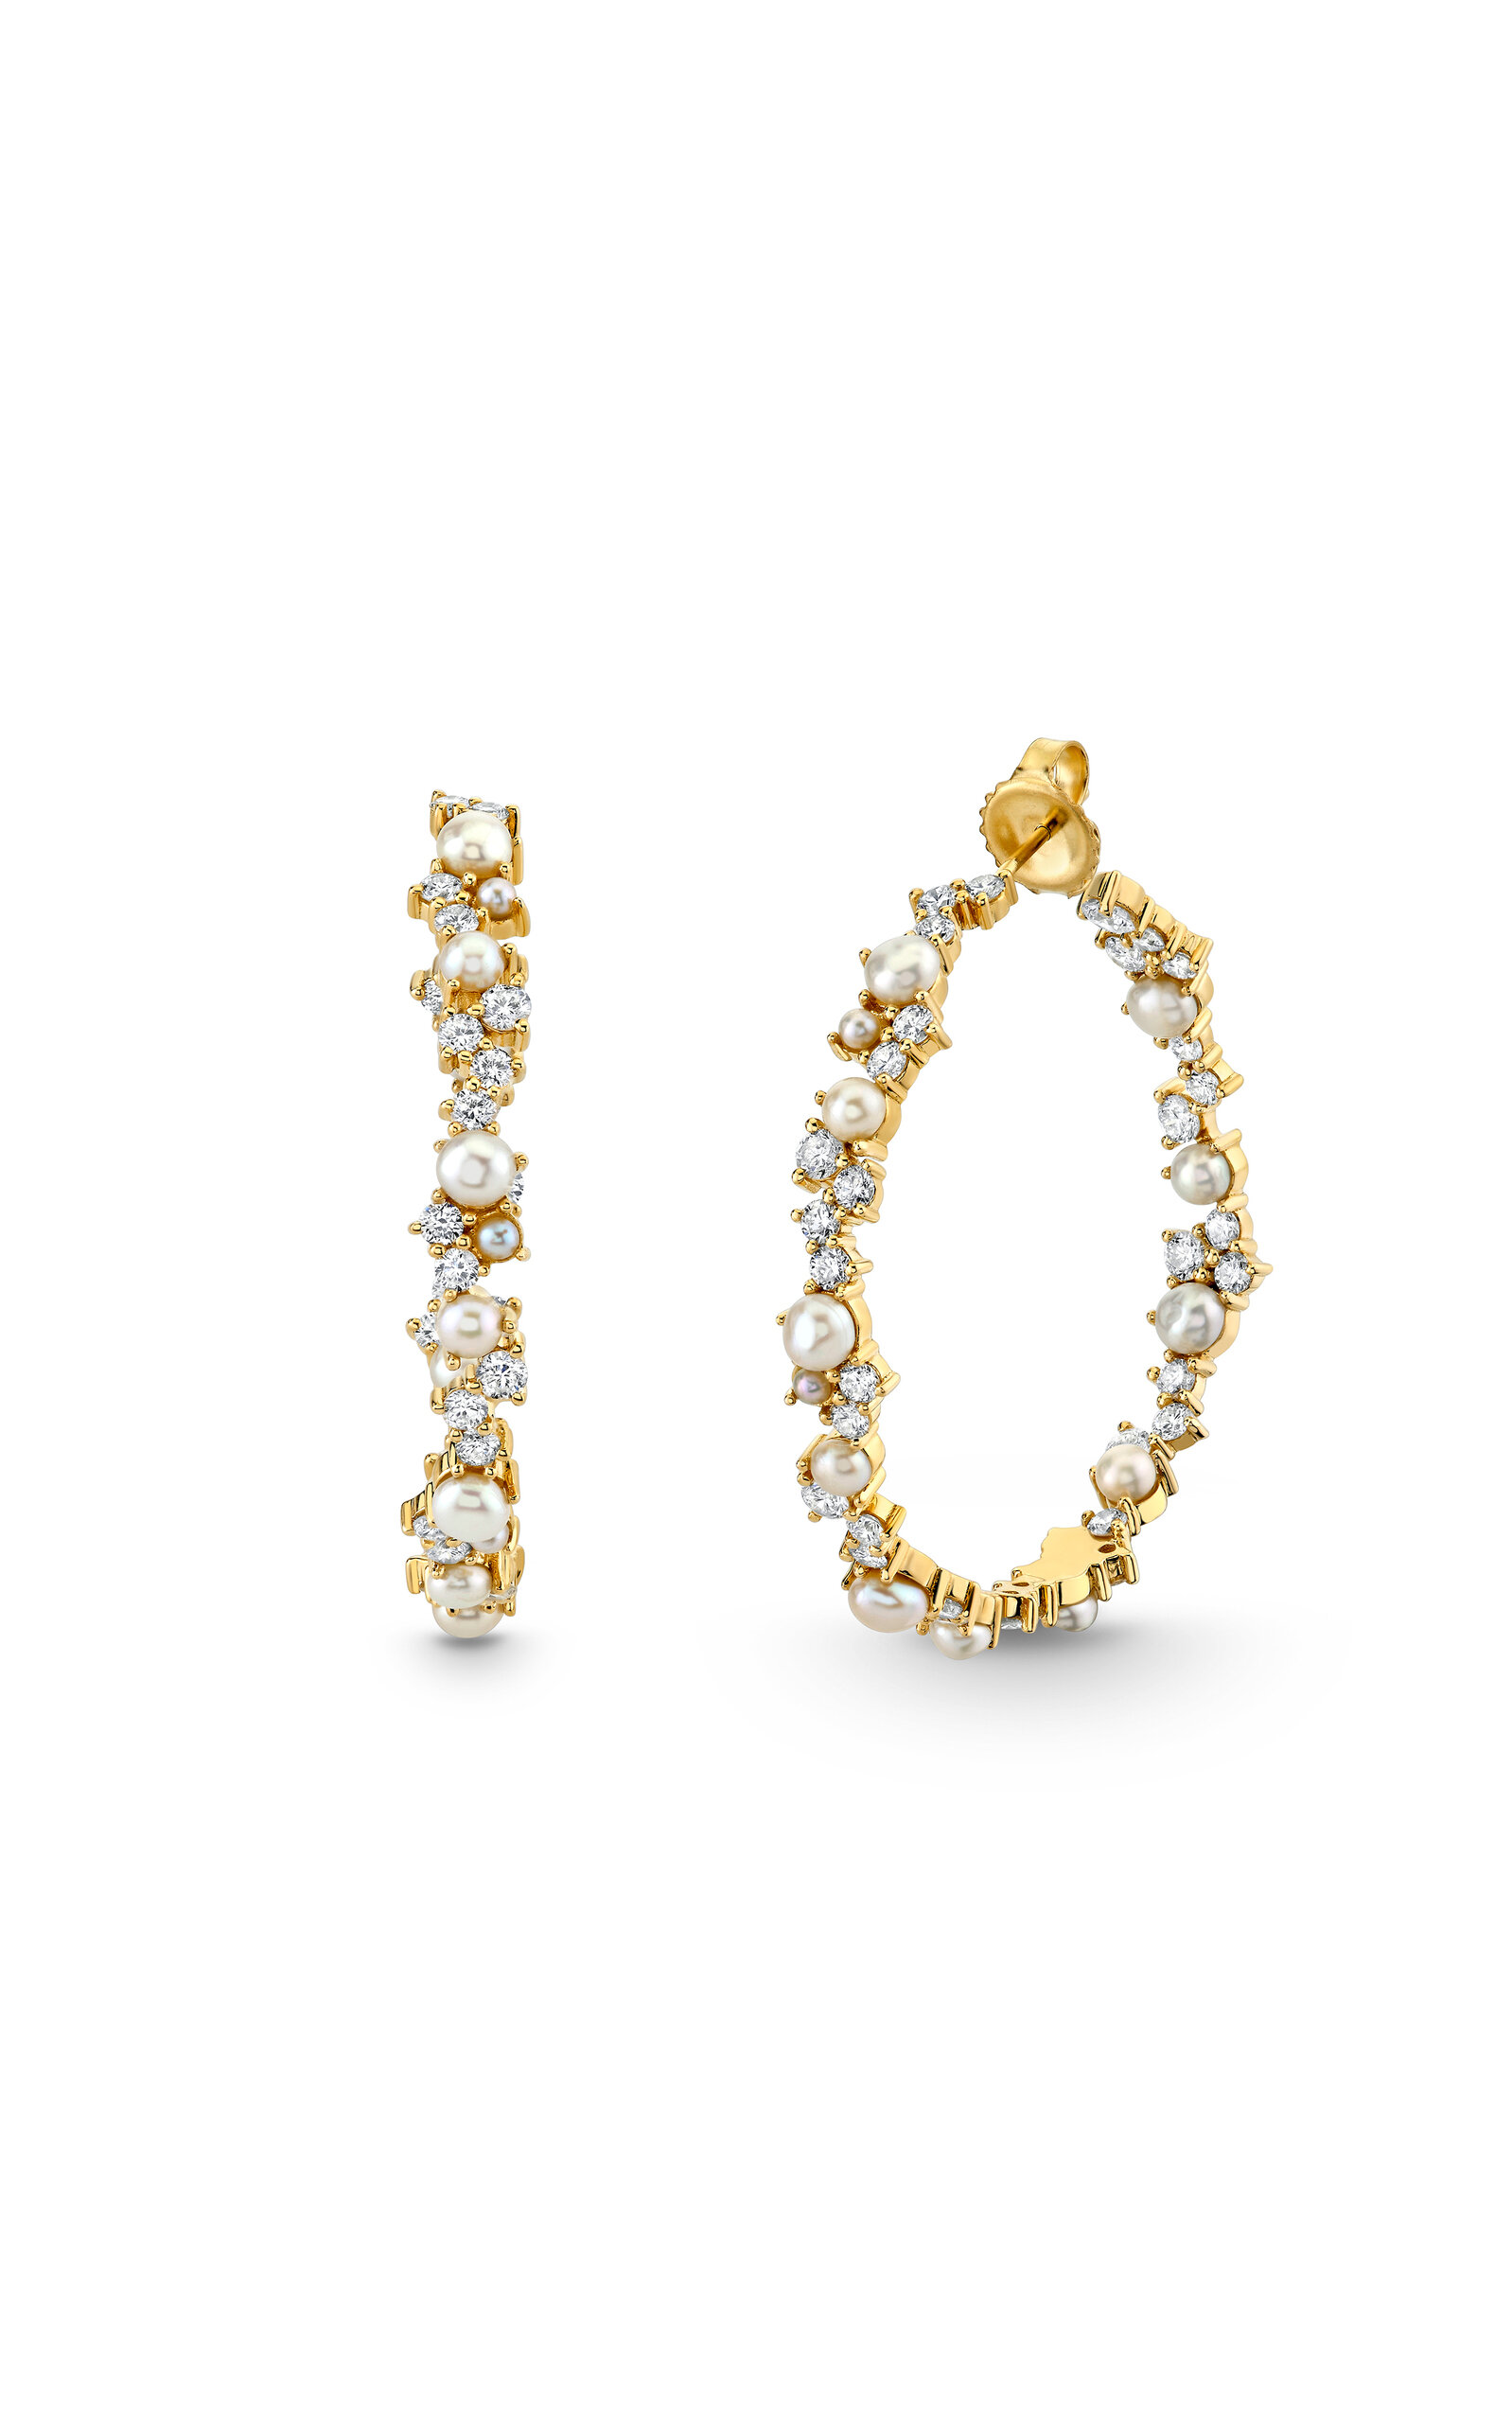 14k Yellow Gold Large Cocktail Hoop Earrings